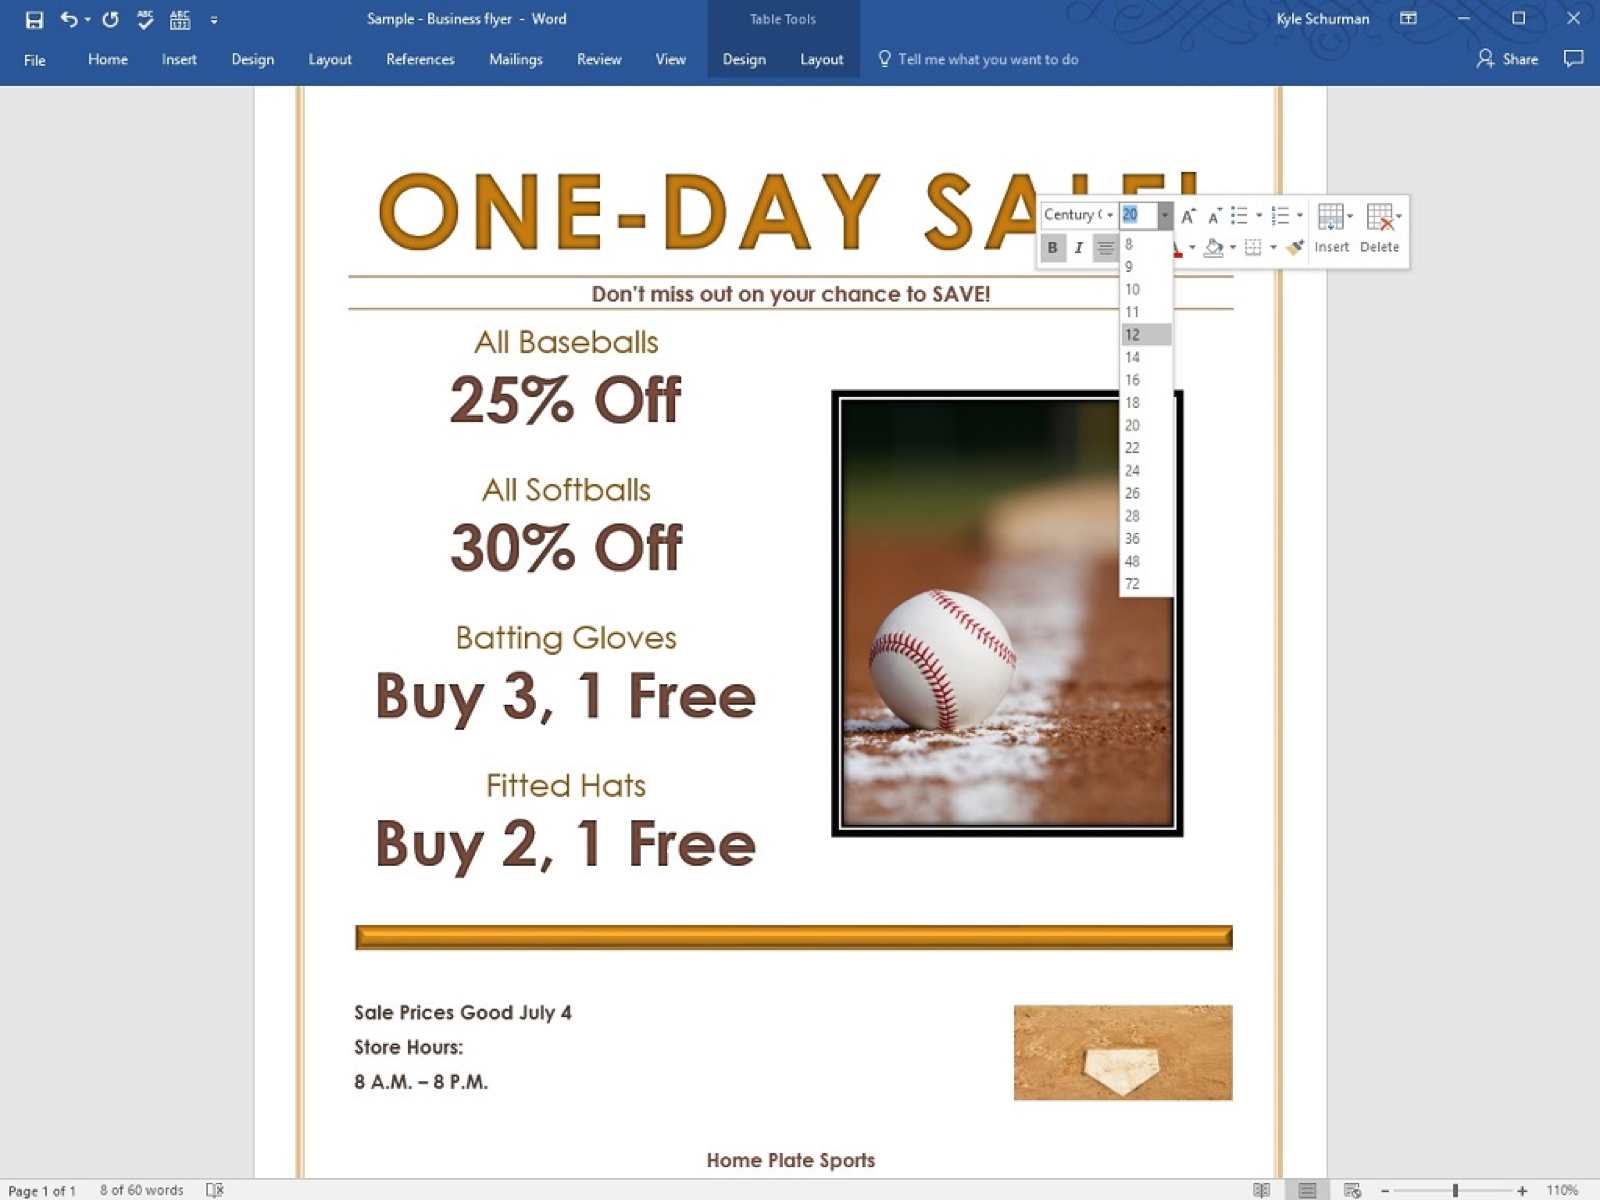 How to Make a Business Flyer in Word